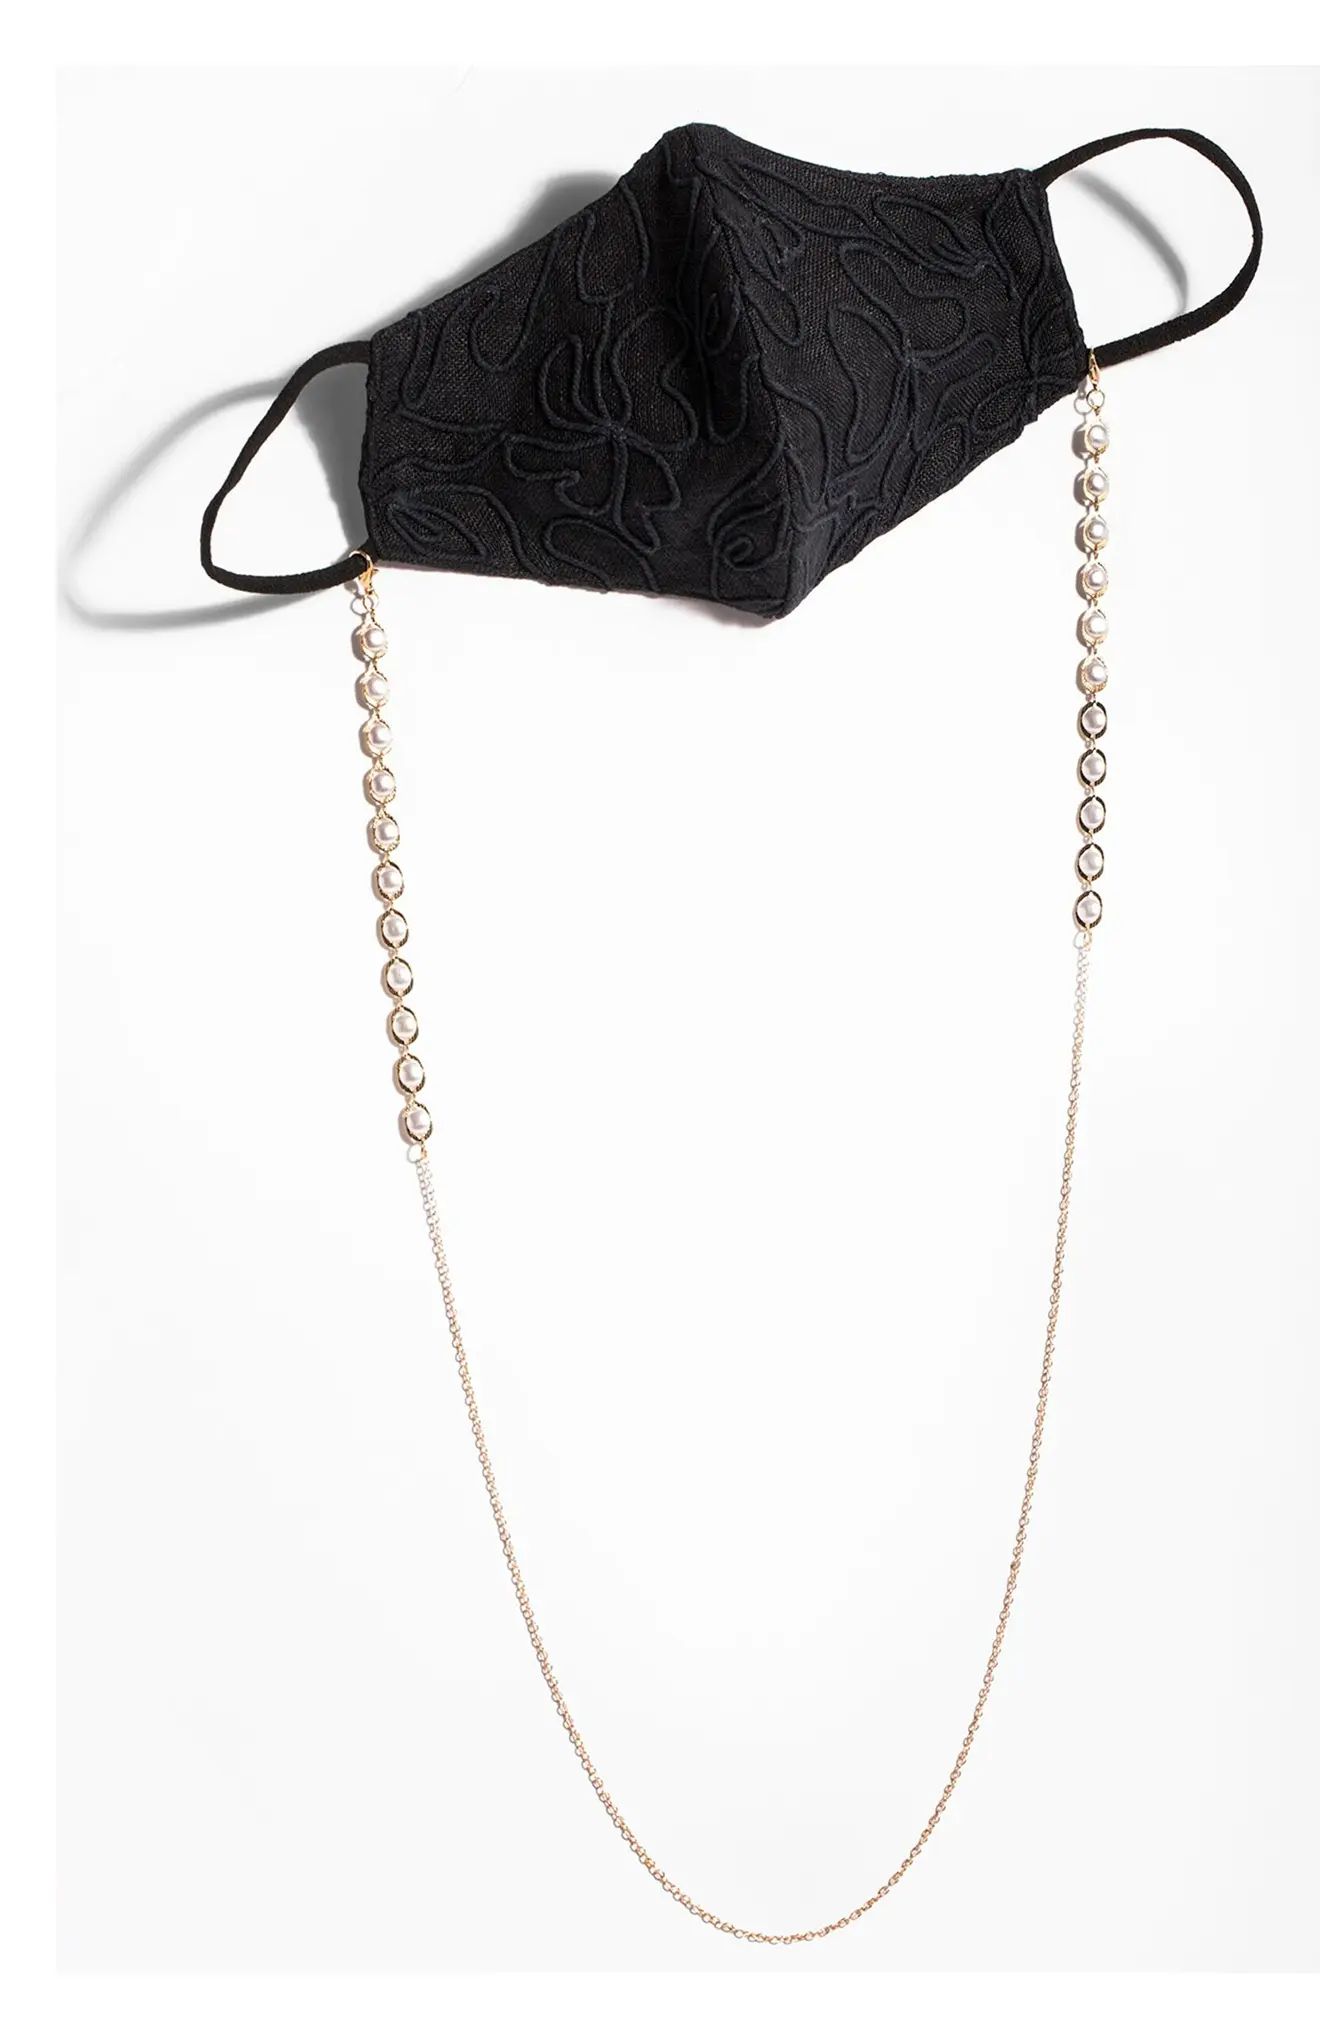 Eyeglass Mask Chain with Imitation Pearls | Nordstrom Rack